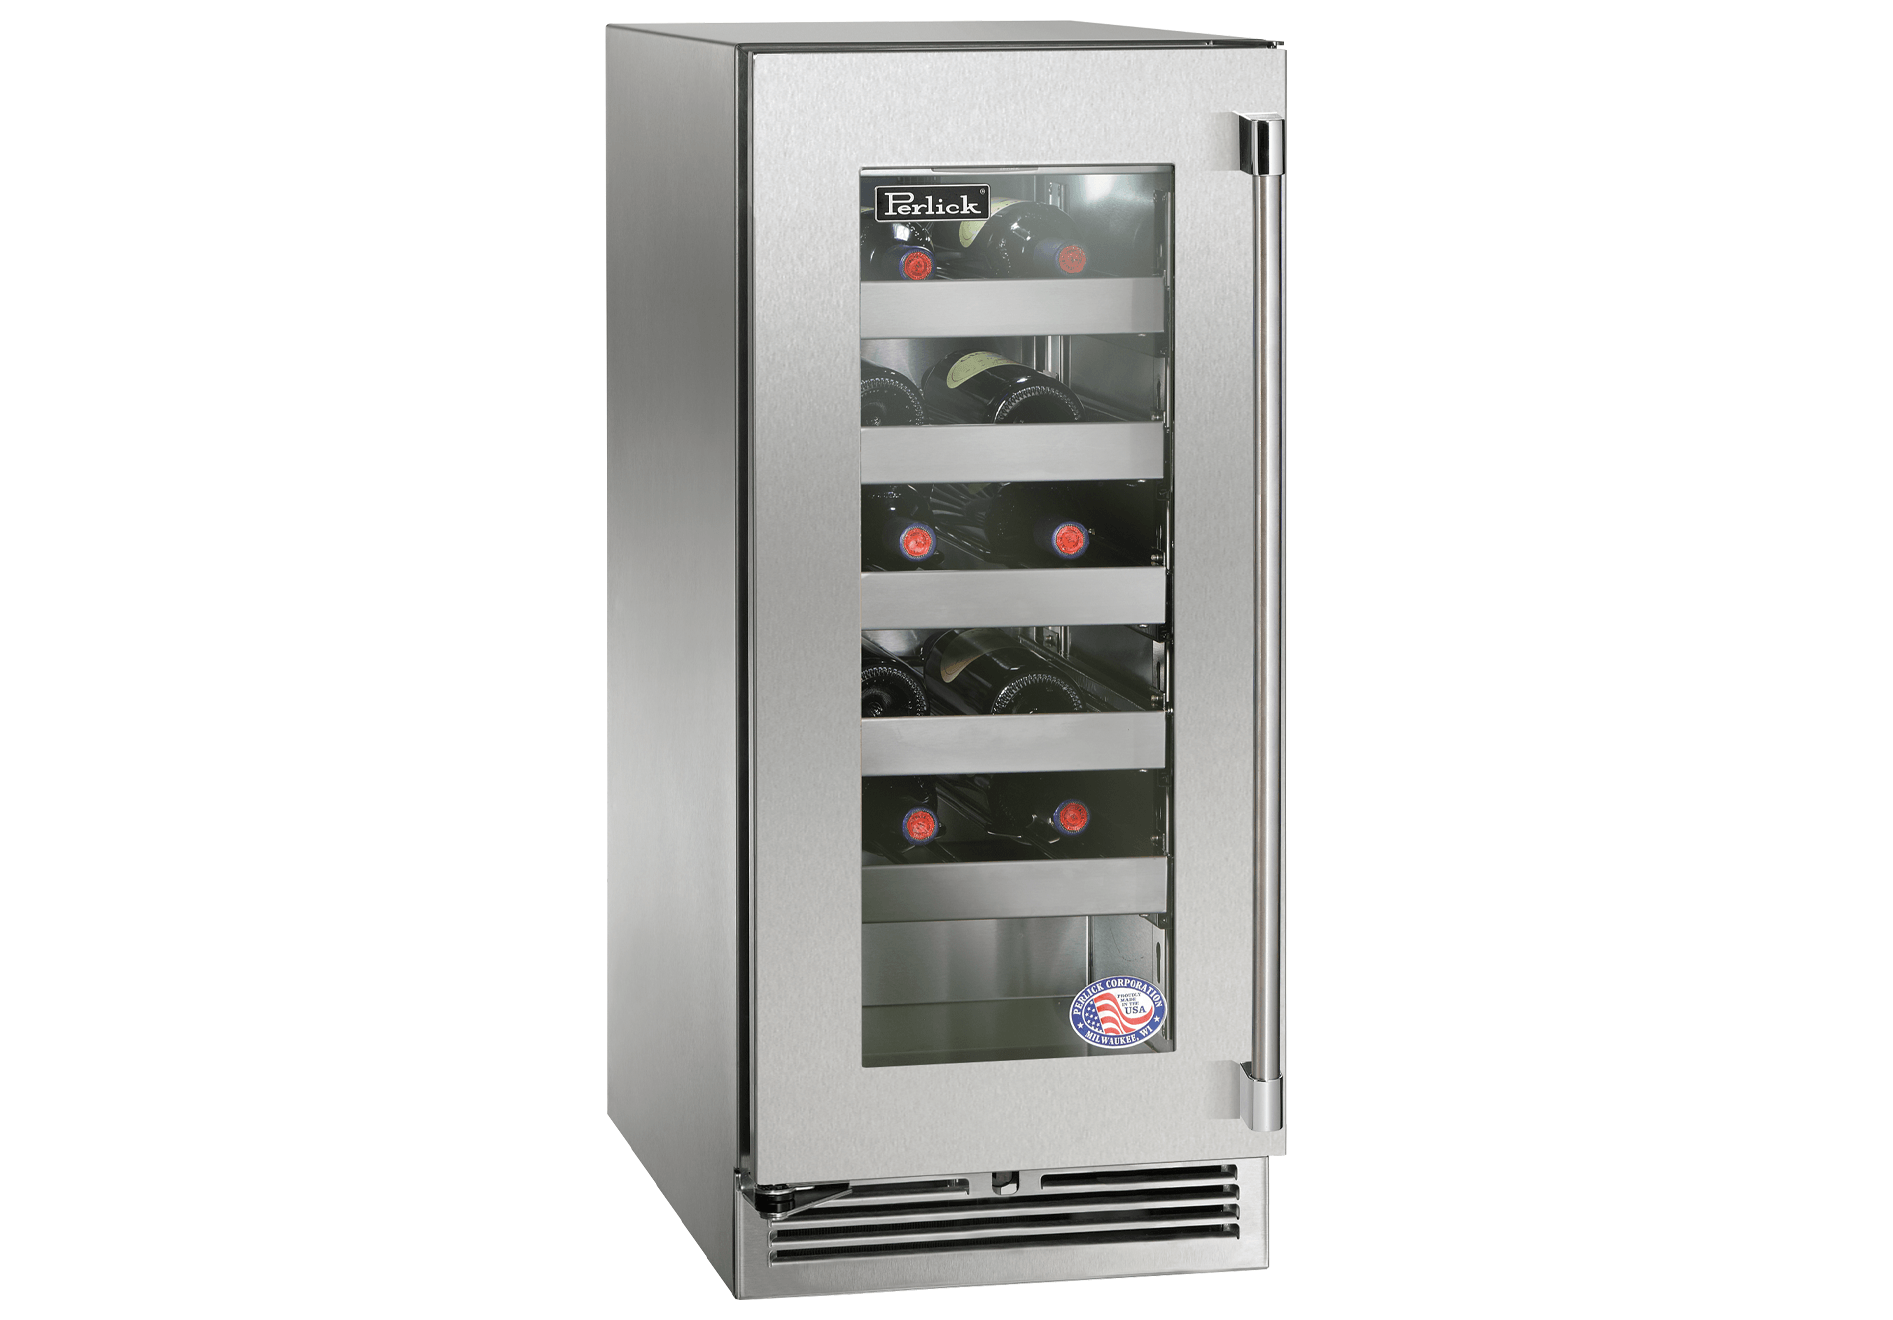 Perlick Signature Series 15-Inch Built-In Single Zone Wine Cooler with 20 Bottle Capacity in Stainless Steel with Glass Door (HP15WS-4-3L & HP15WS-4-3R) Wine Coolers Empire